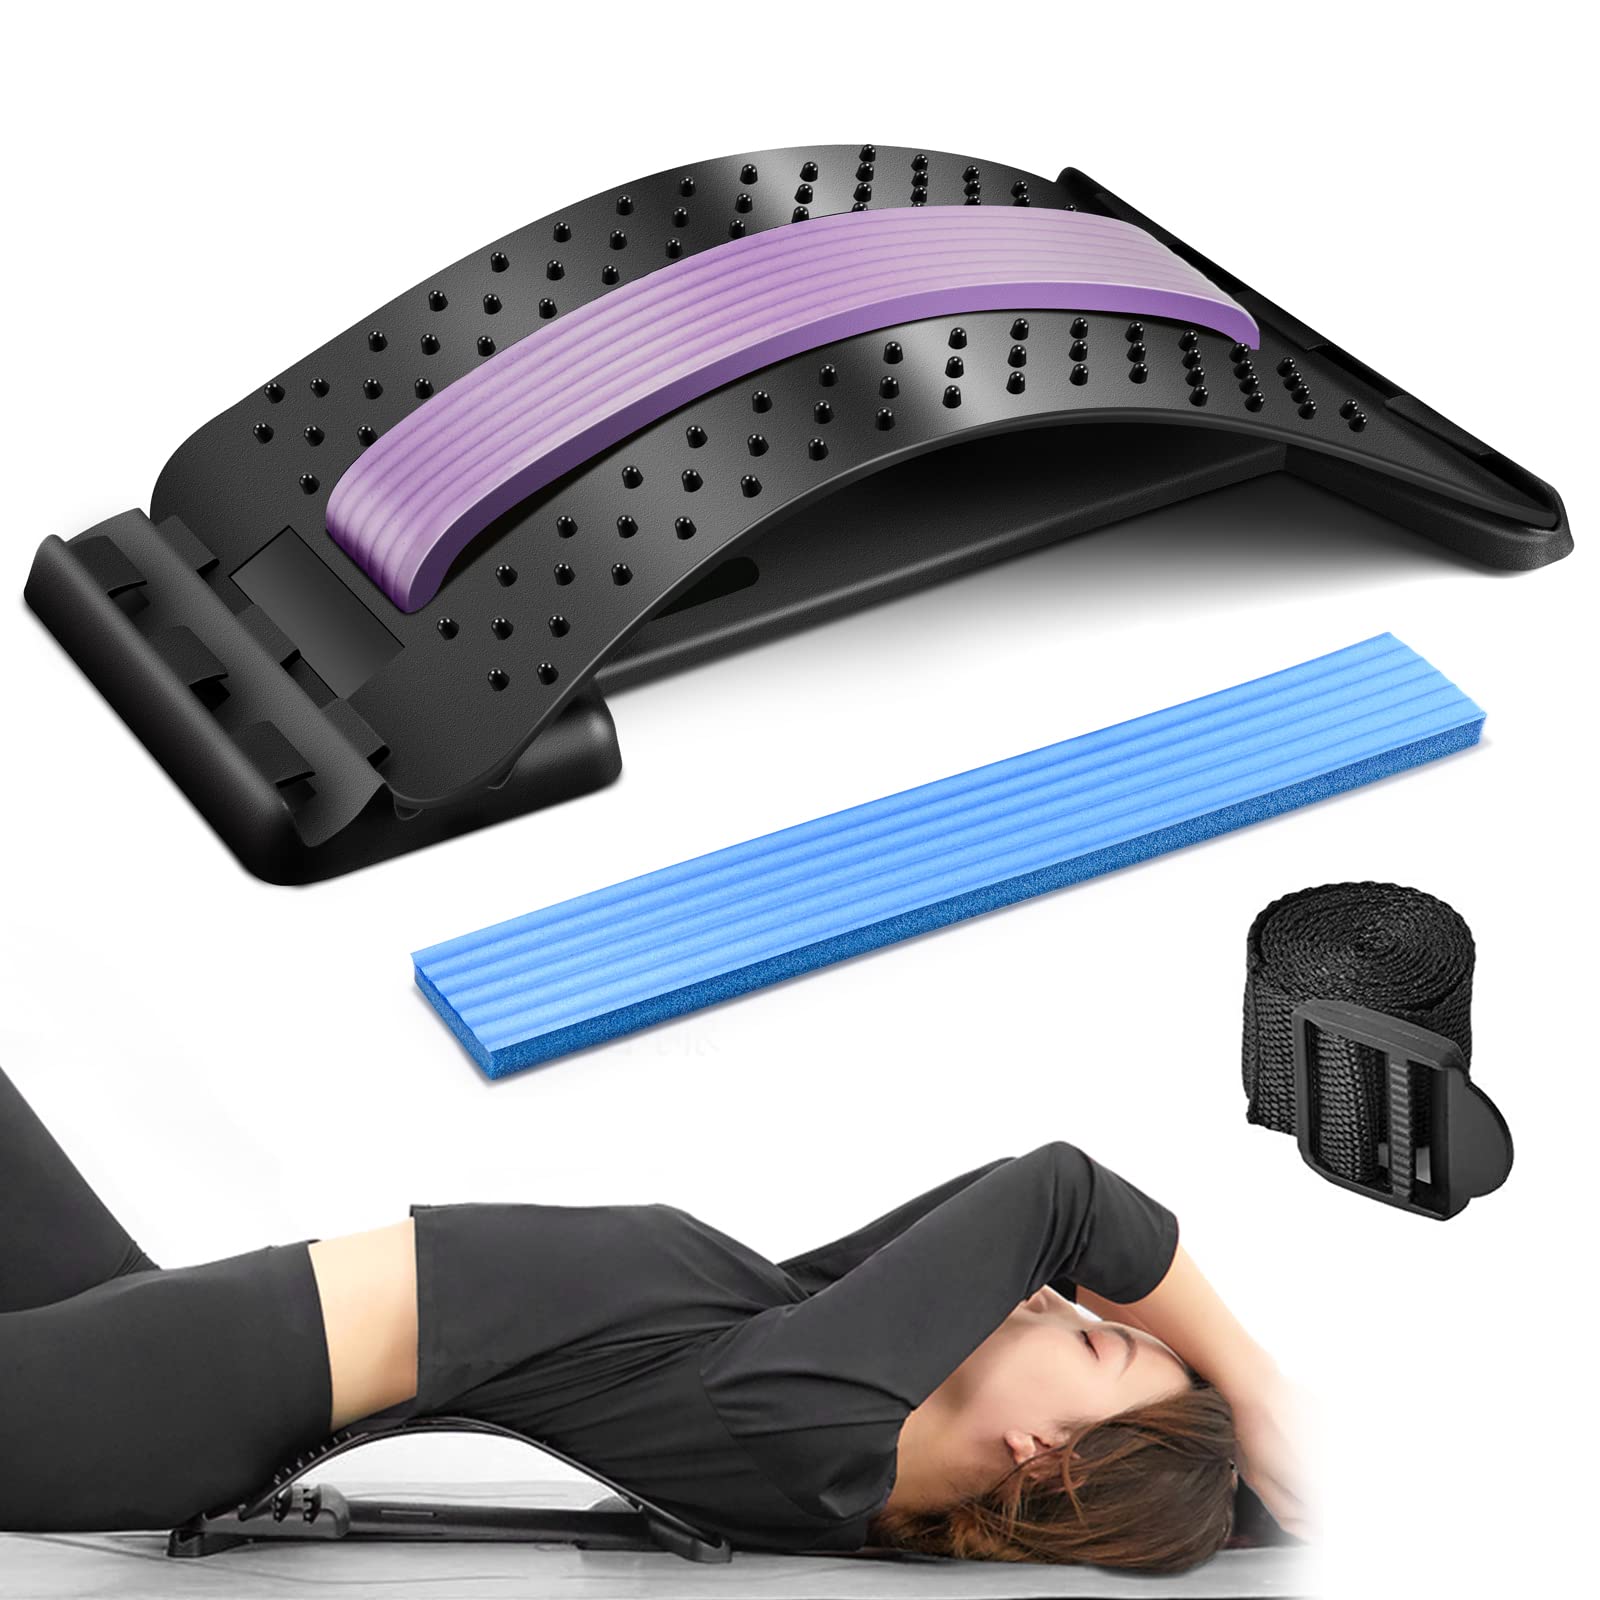 Back Pain Relief Treatment Stretcher, Back Stretching Device For